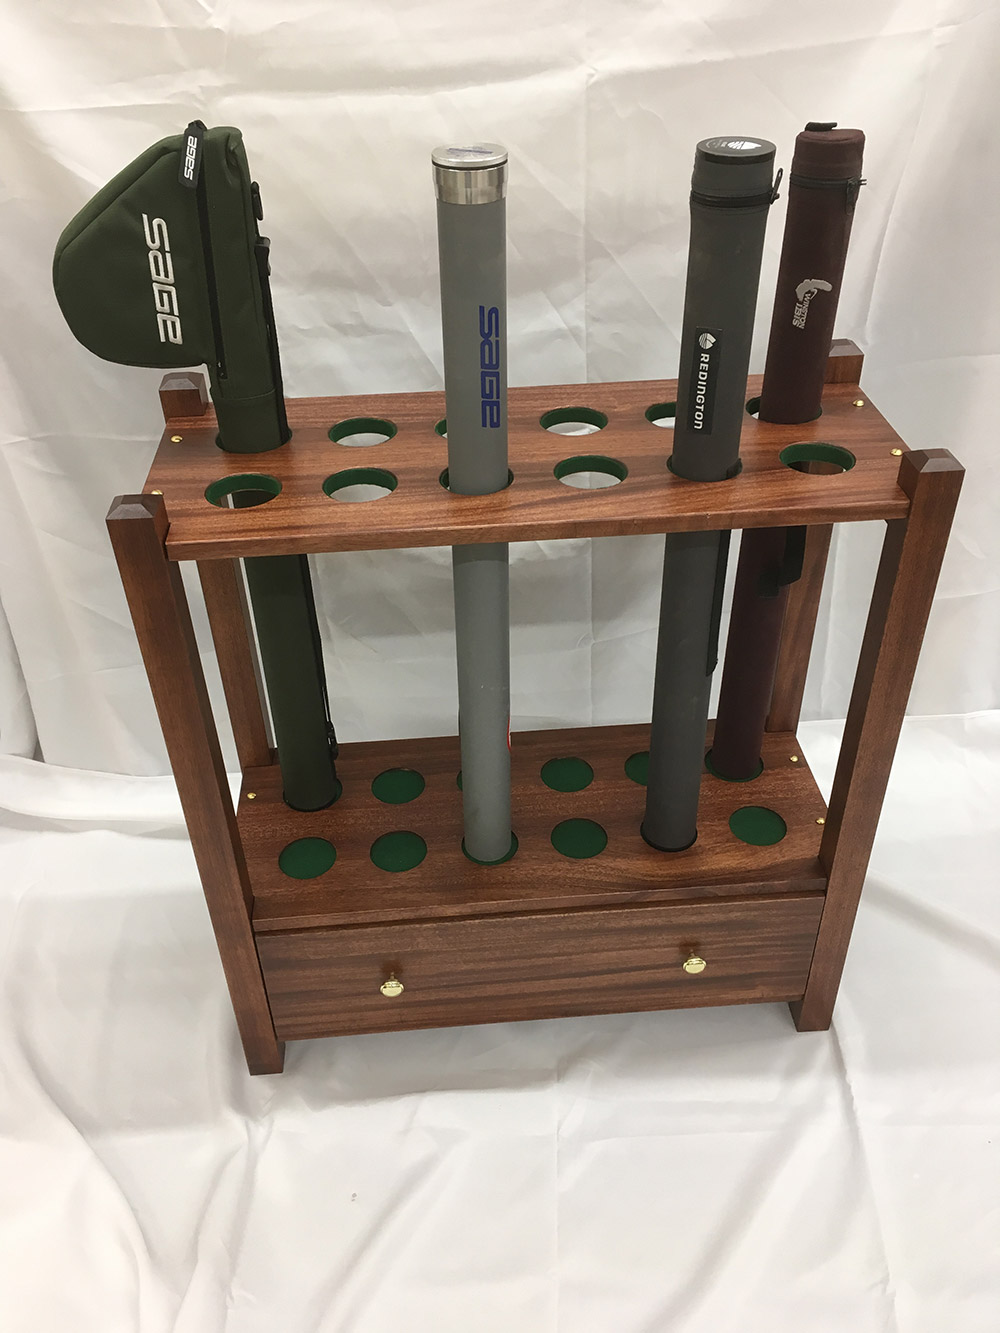 Custom Fly fishing cabinets from New Hamphire: Solid Cherry Wood Fly-fishing  Rod Holders. Custom Cabinetry